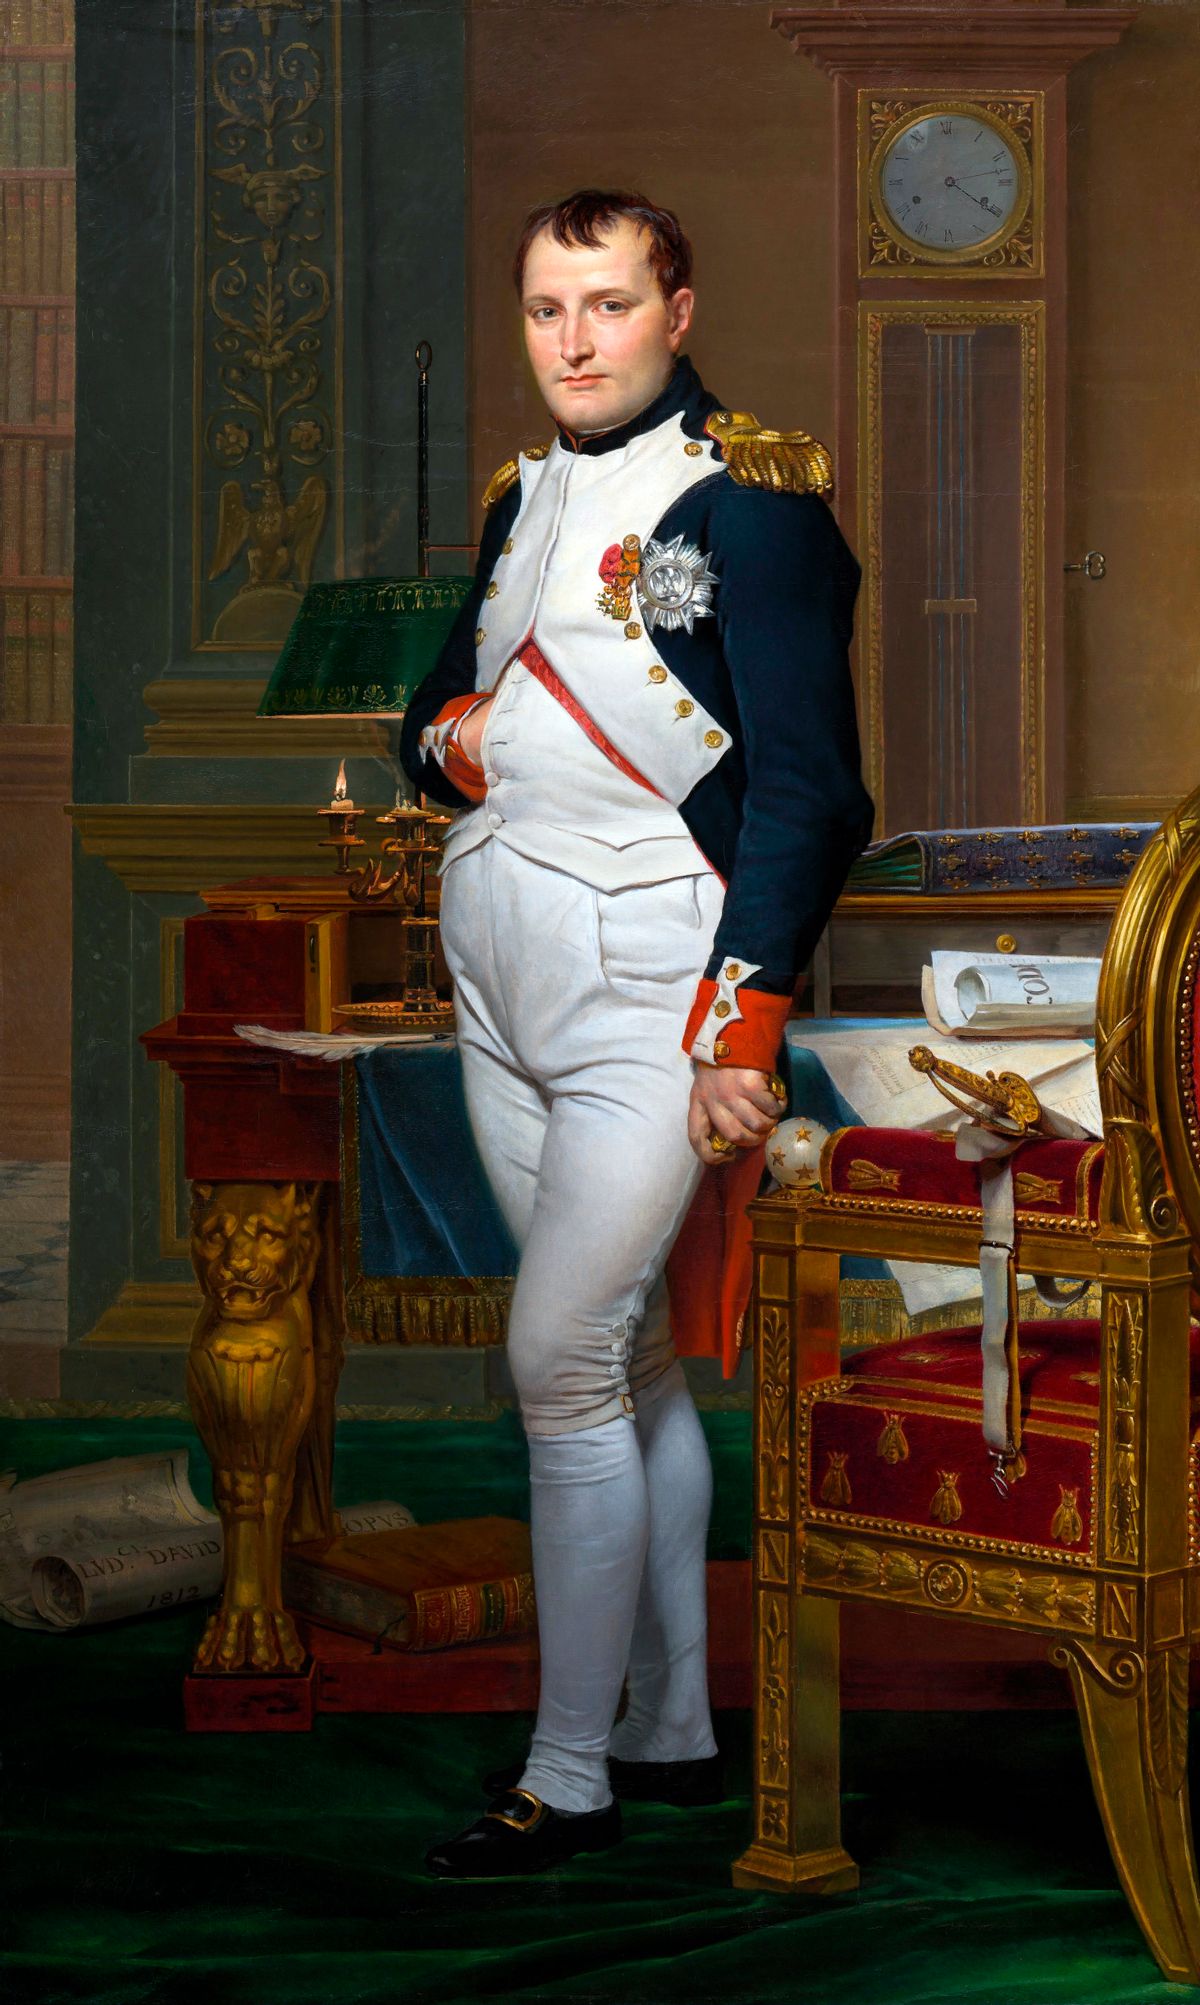 Jacques-Louis David (French, 1748 – 1825), The Emperor Napoleon in His Study at the Tuileries, 1812, oil on canvas, 203.9 x 125.1 cm (80 1/4 x 49 1/4 in.), National Gallery, Washington, D.C. (Photo by VCG Wilson/Corbis via Getty Images) (VCG Wilson/Corbis via Getty Images)